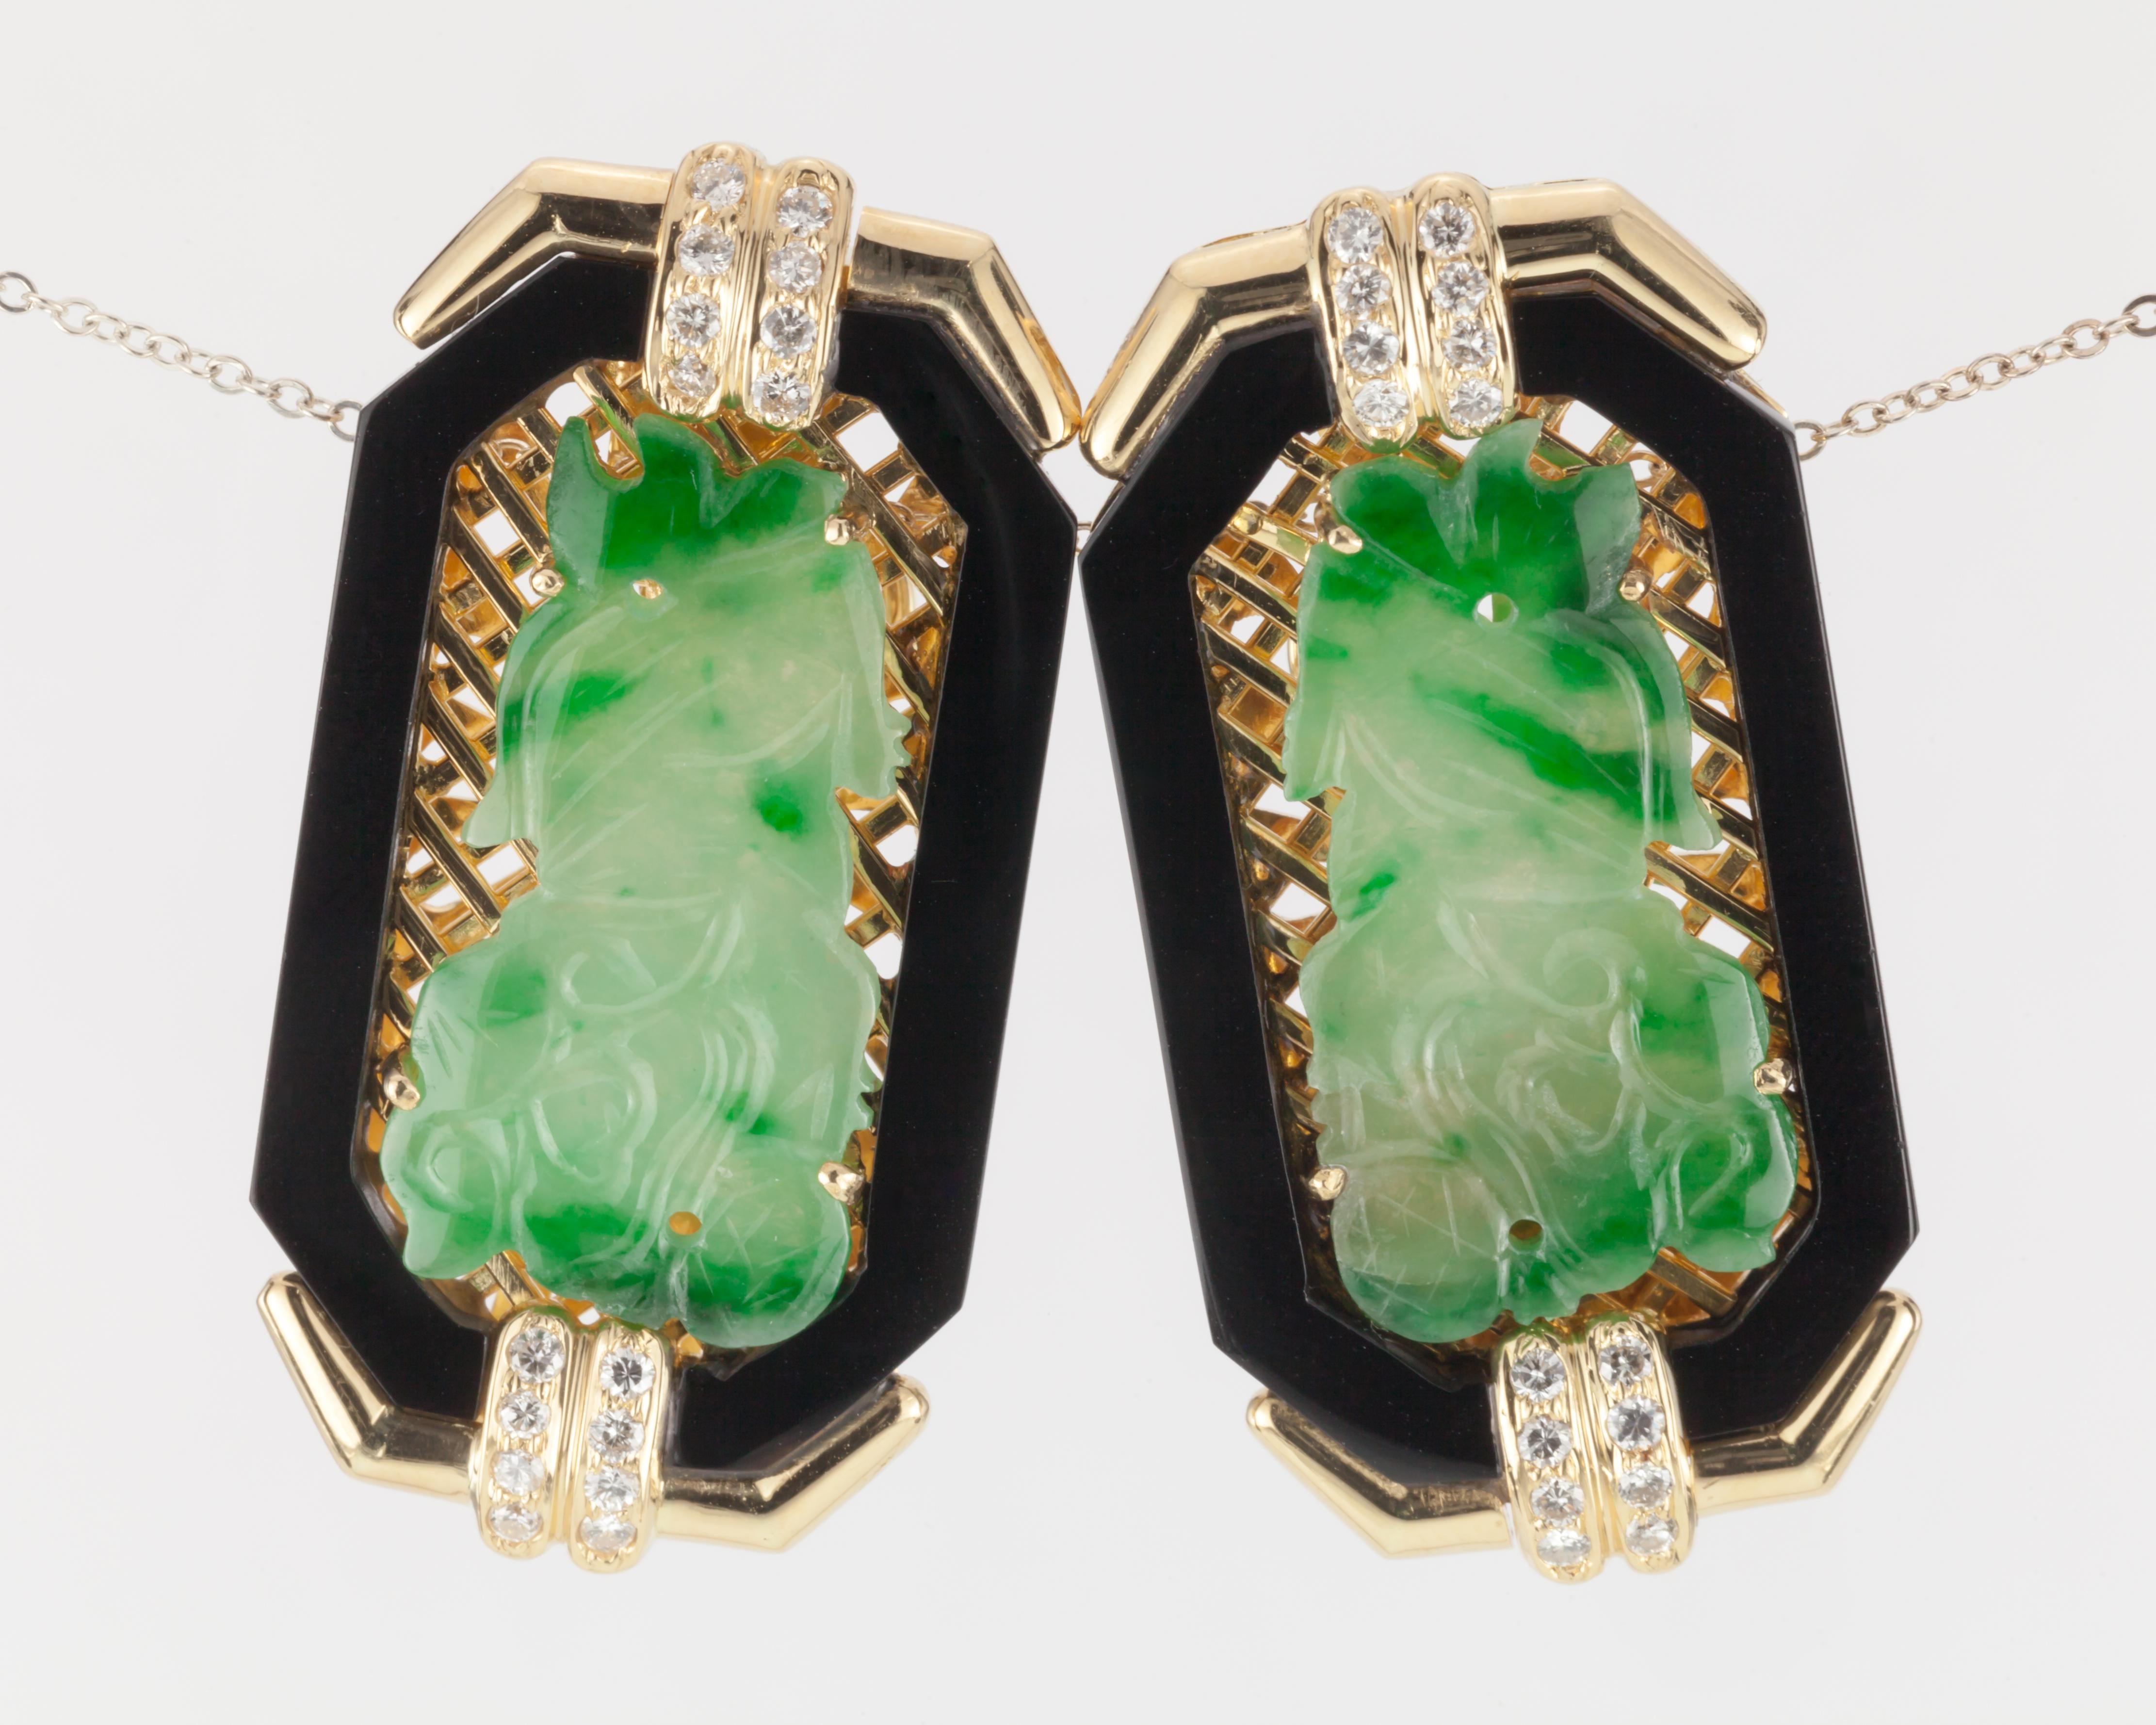 Imperial Jade with Onyx Border and Diamond Accents 18 Karat Yellow Gold Earrings For Sale 8